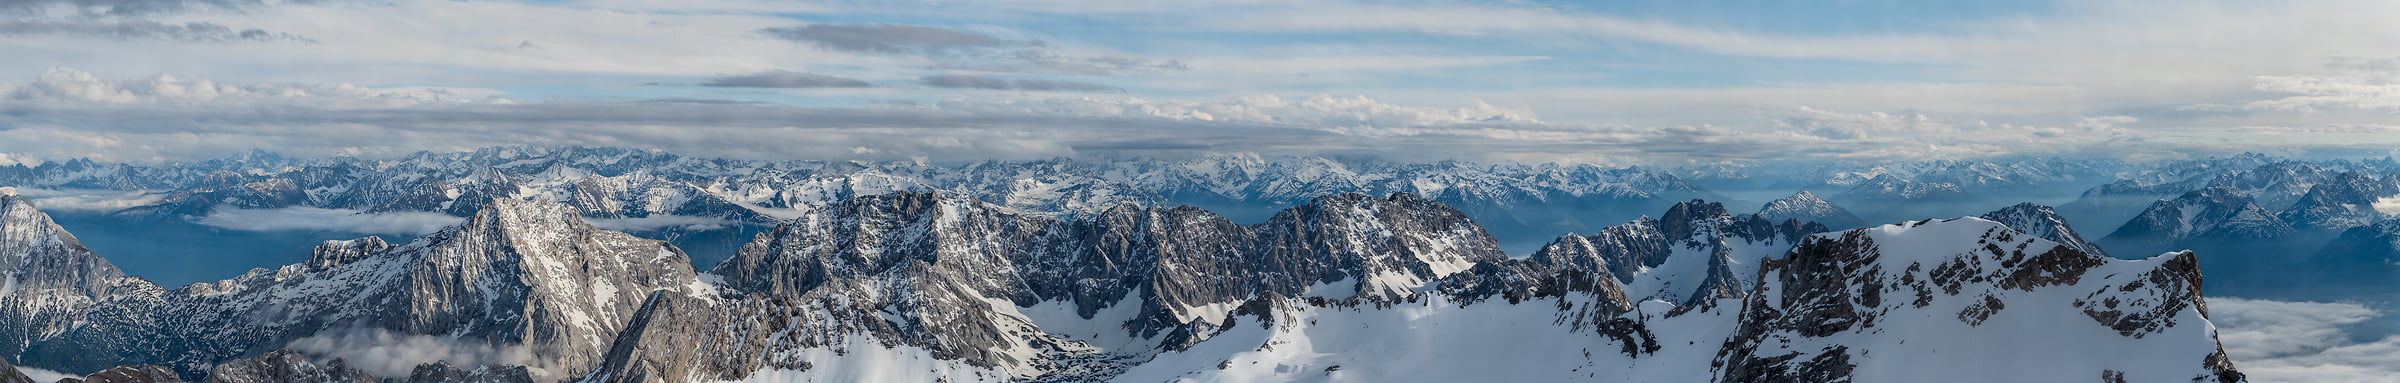 685 megapixels! A very high resolution, large-format VAST photo print of an alpine landscape with snowy mountains; panorama photograph created by Alfred Feil in Zugspitze, Germany.